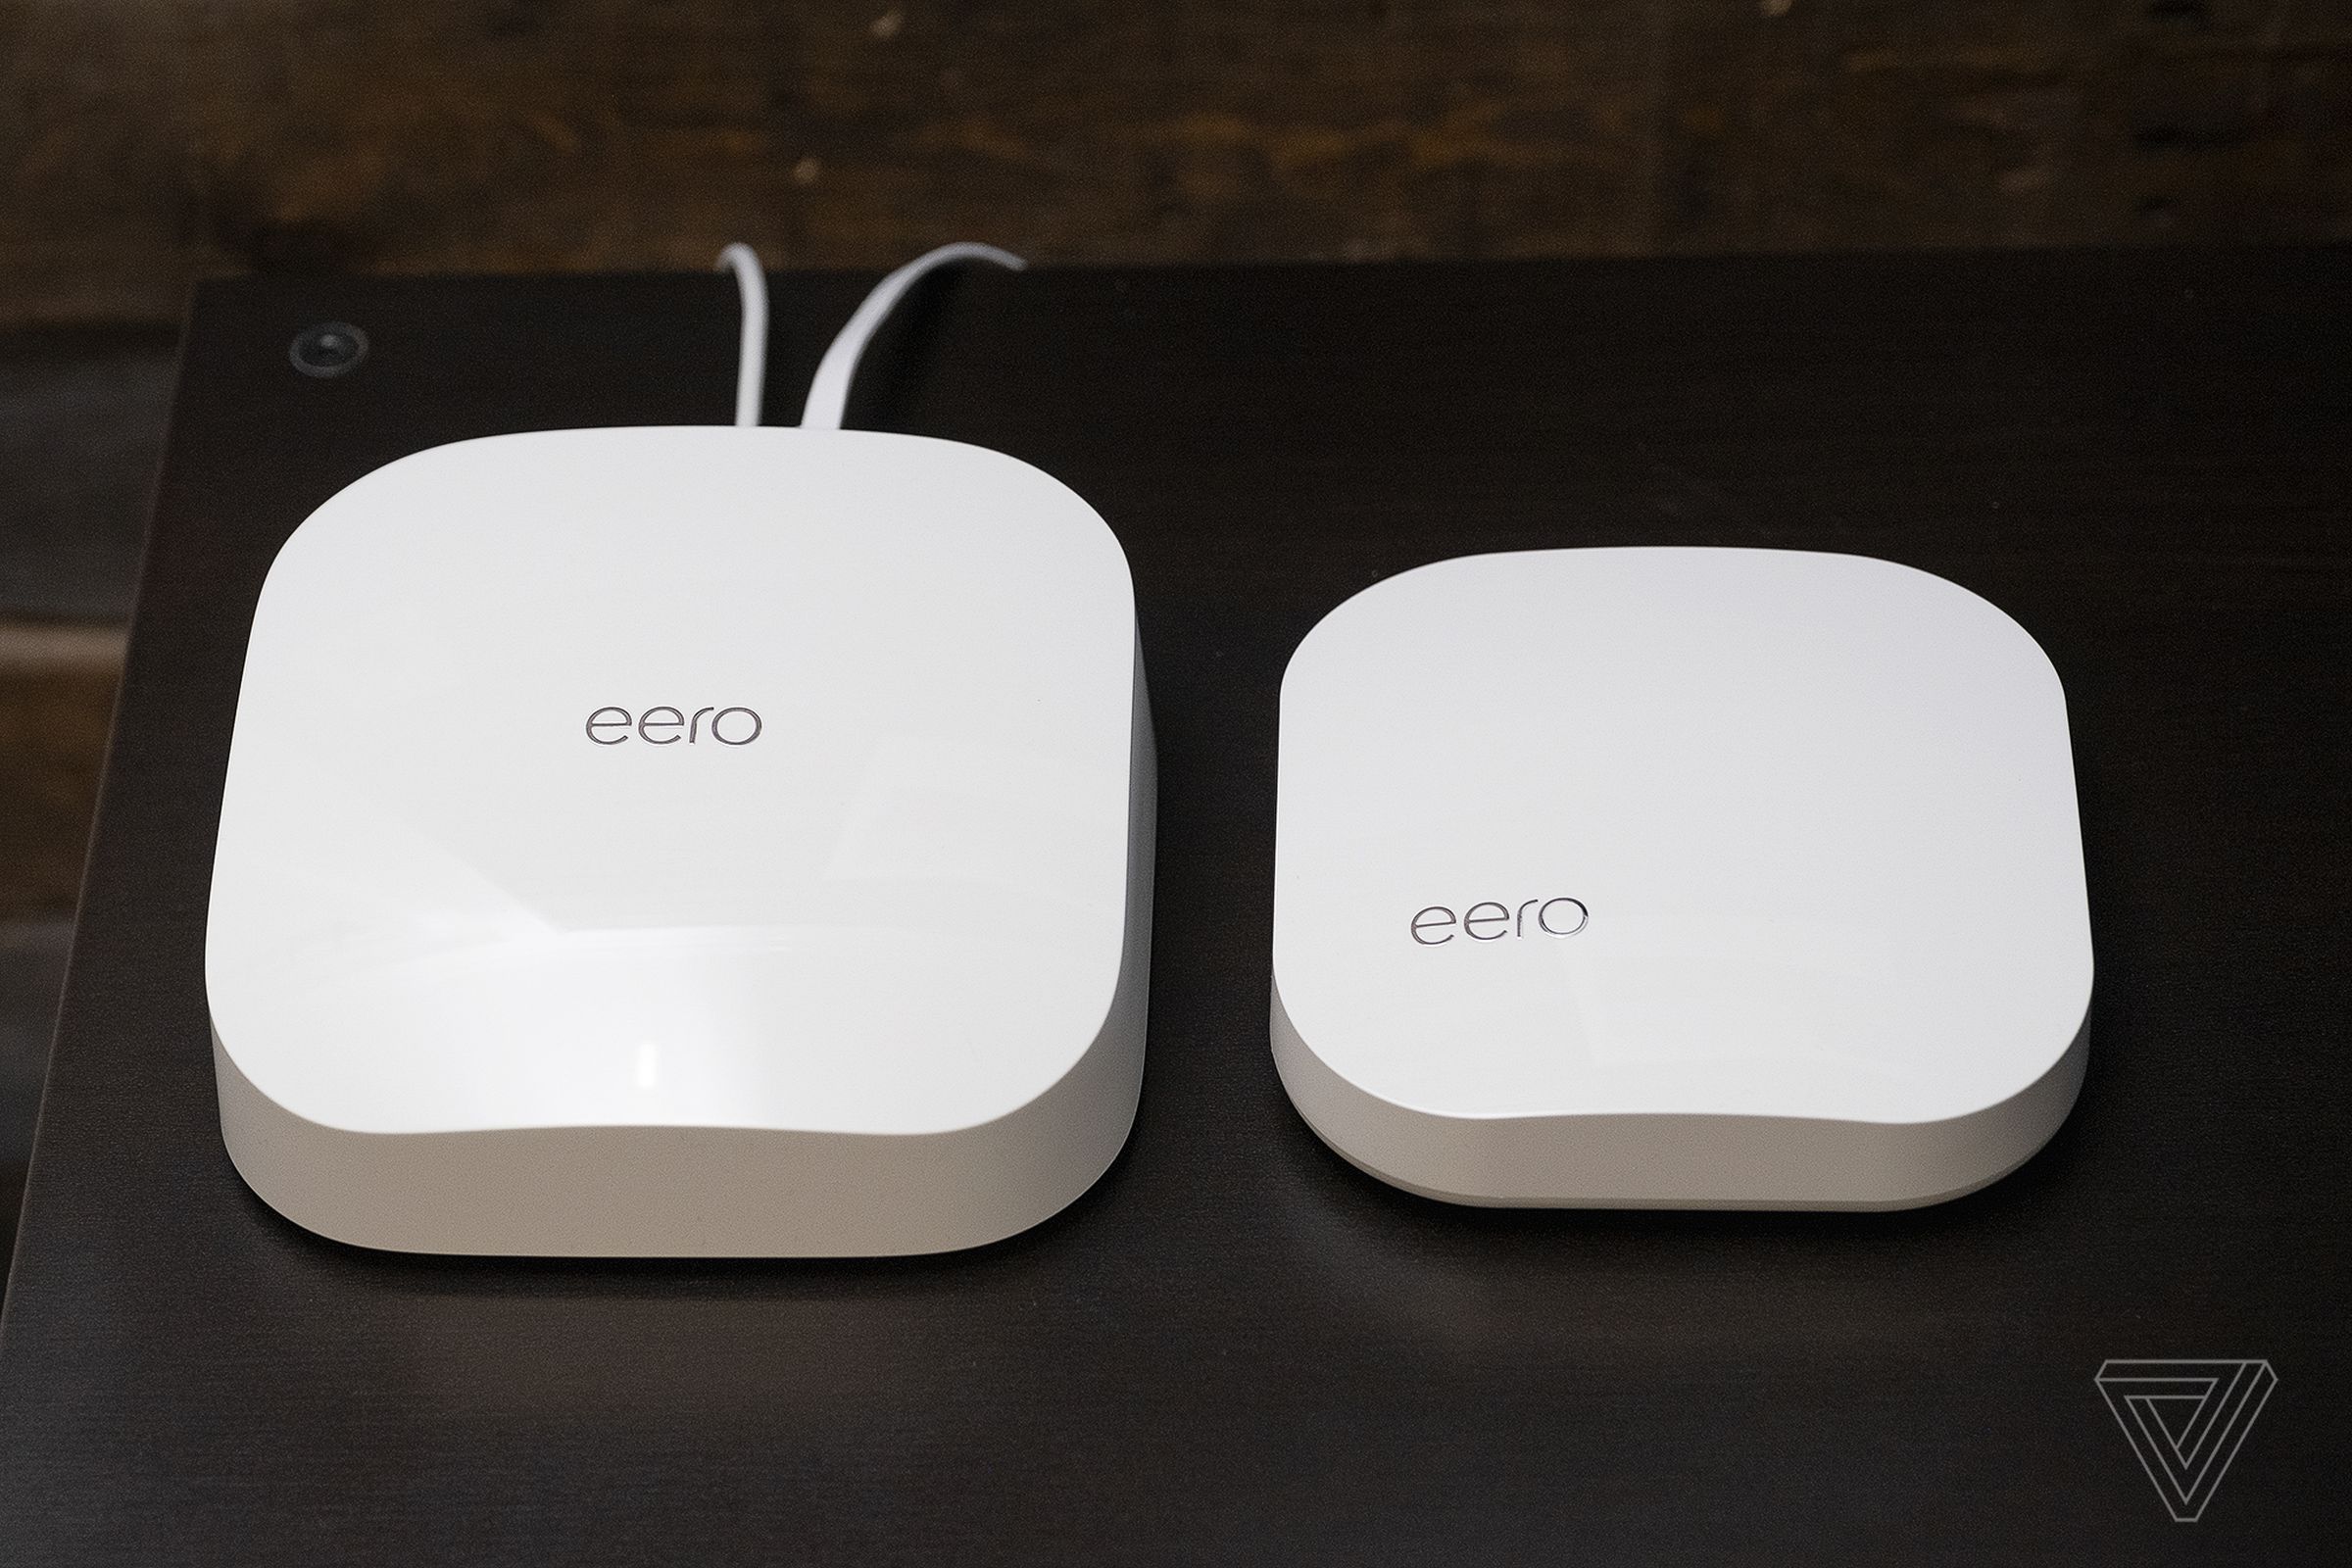 The Eero Pro 6 is a little larger and taller than the Pro 5 system it replaces.